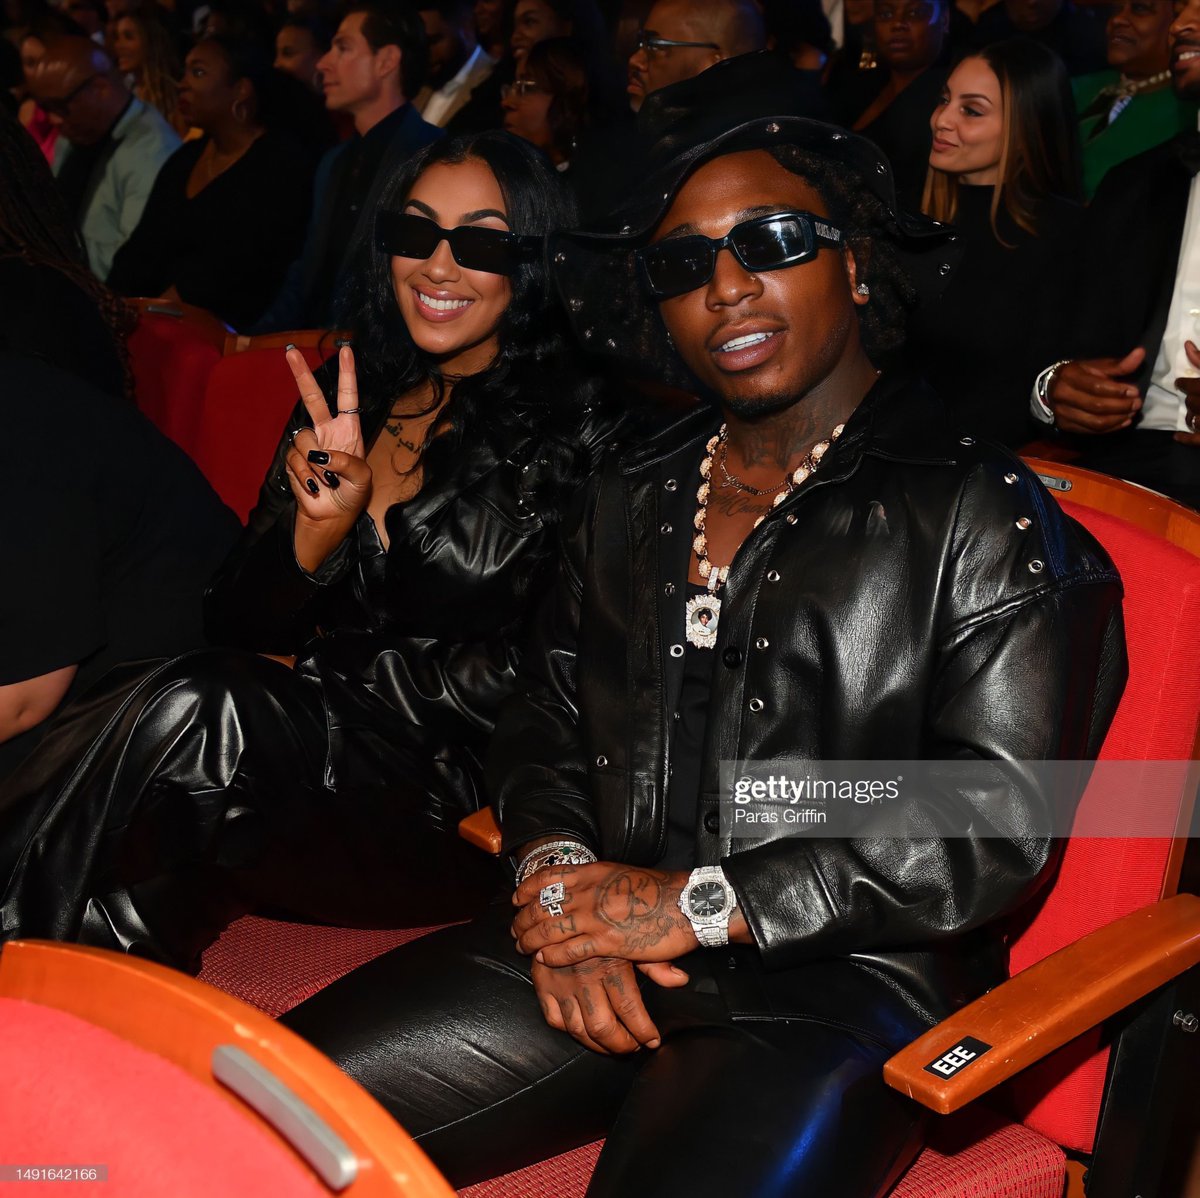 👑✨A duo! 😍🖤

@QueenNaija X @Jacquees inside the 2023 #BlackMusicHonors via Getty images!